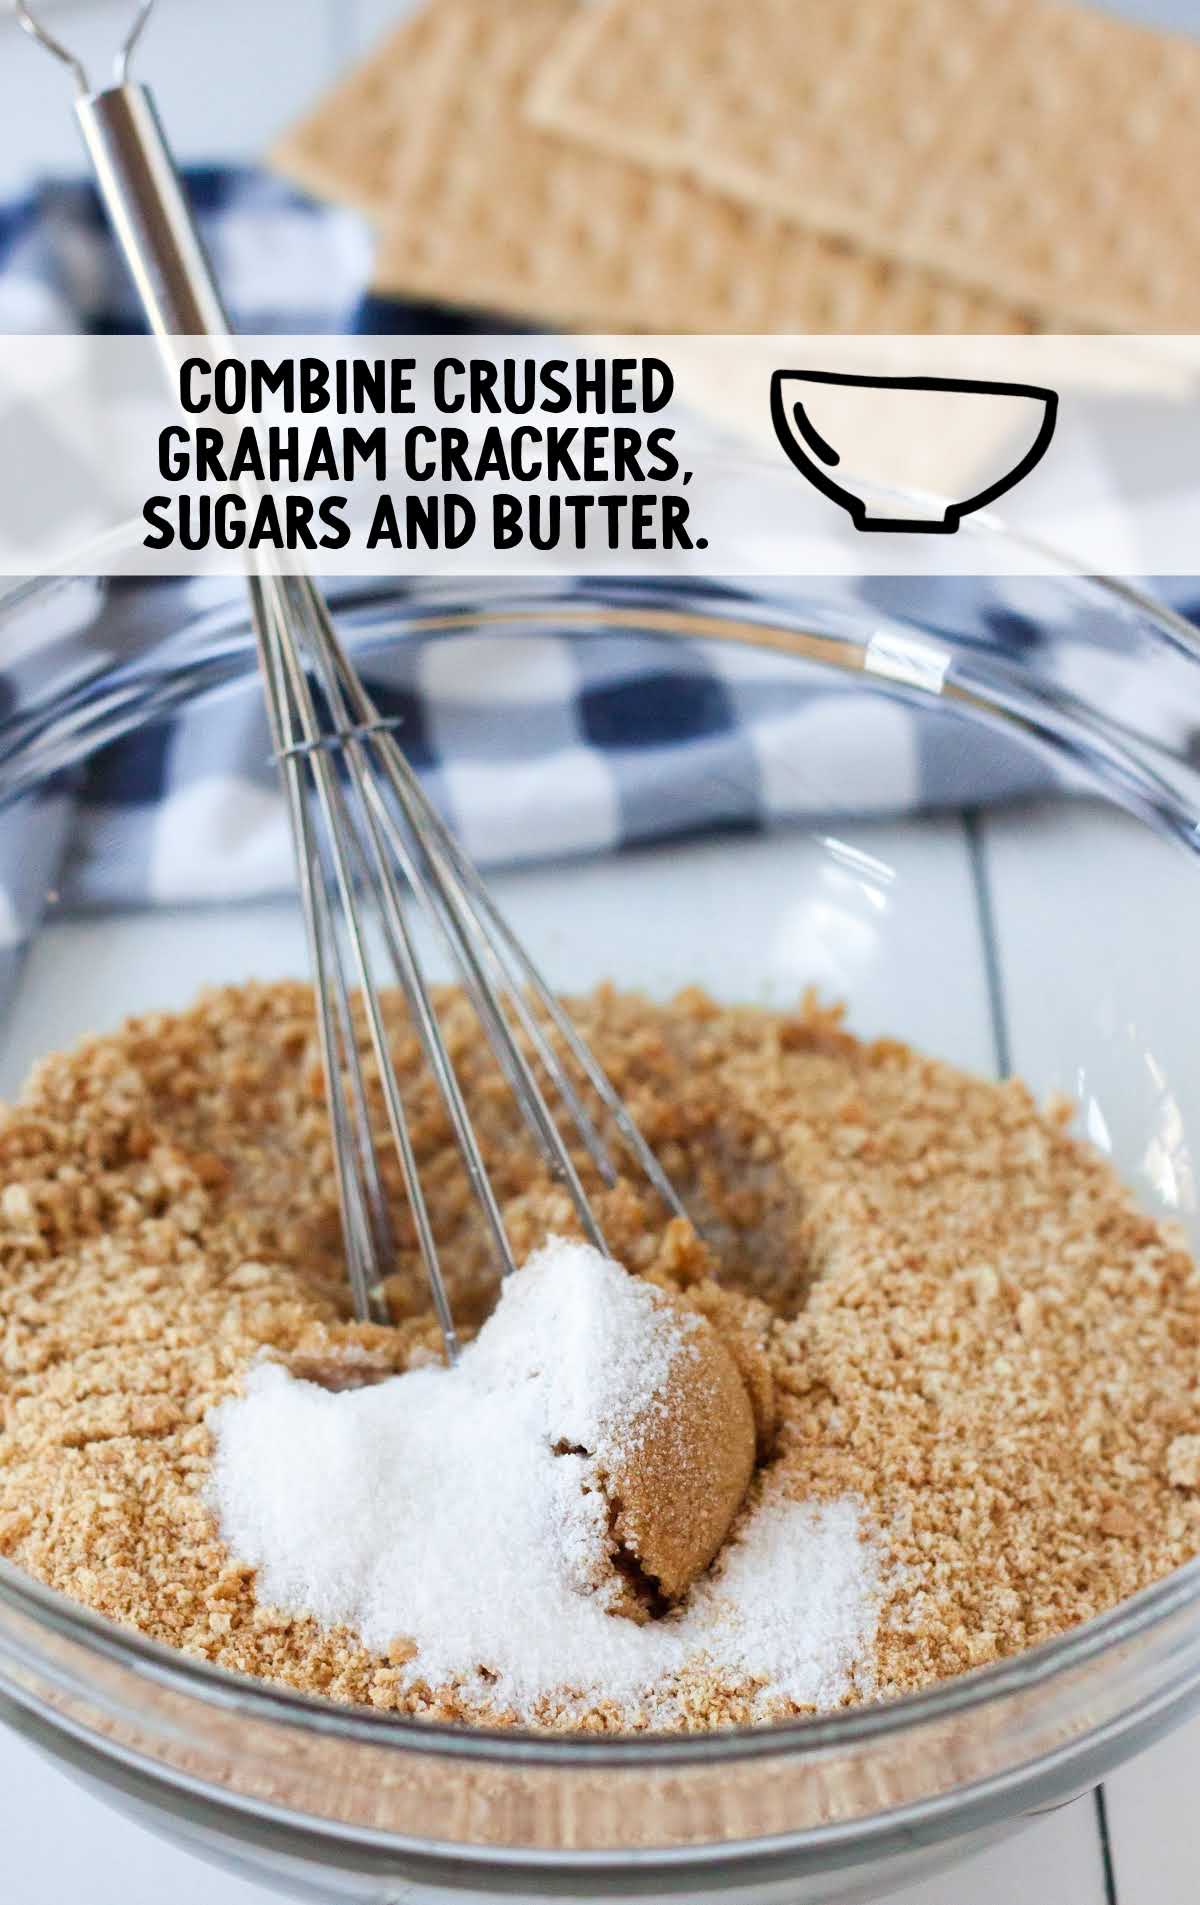 graham crackers, sugars, and butter whisked together in a bowl